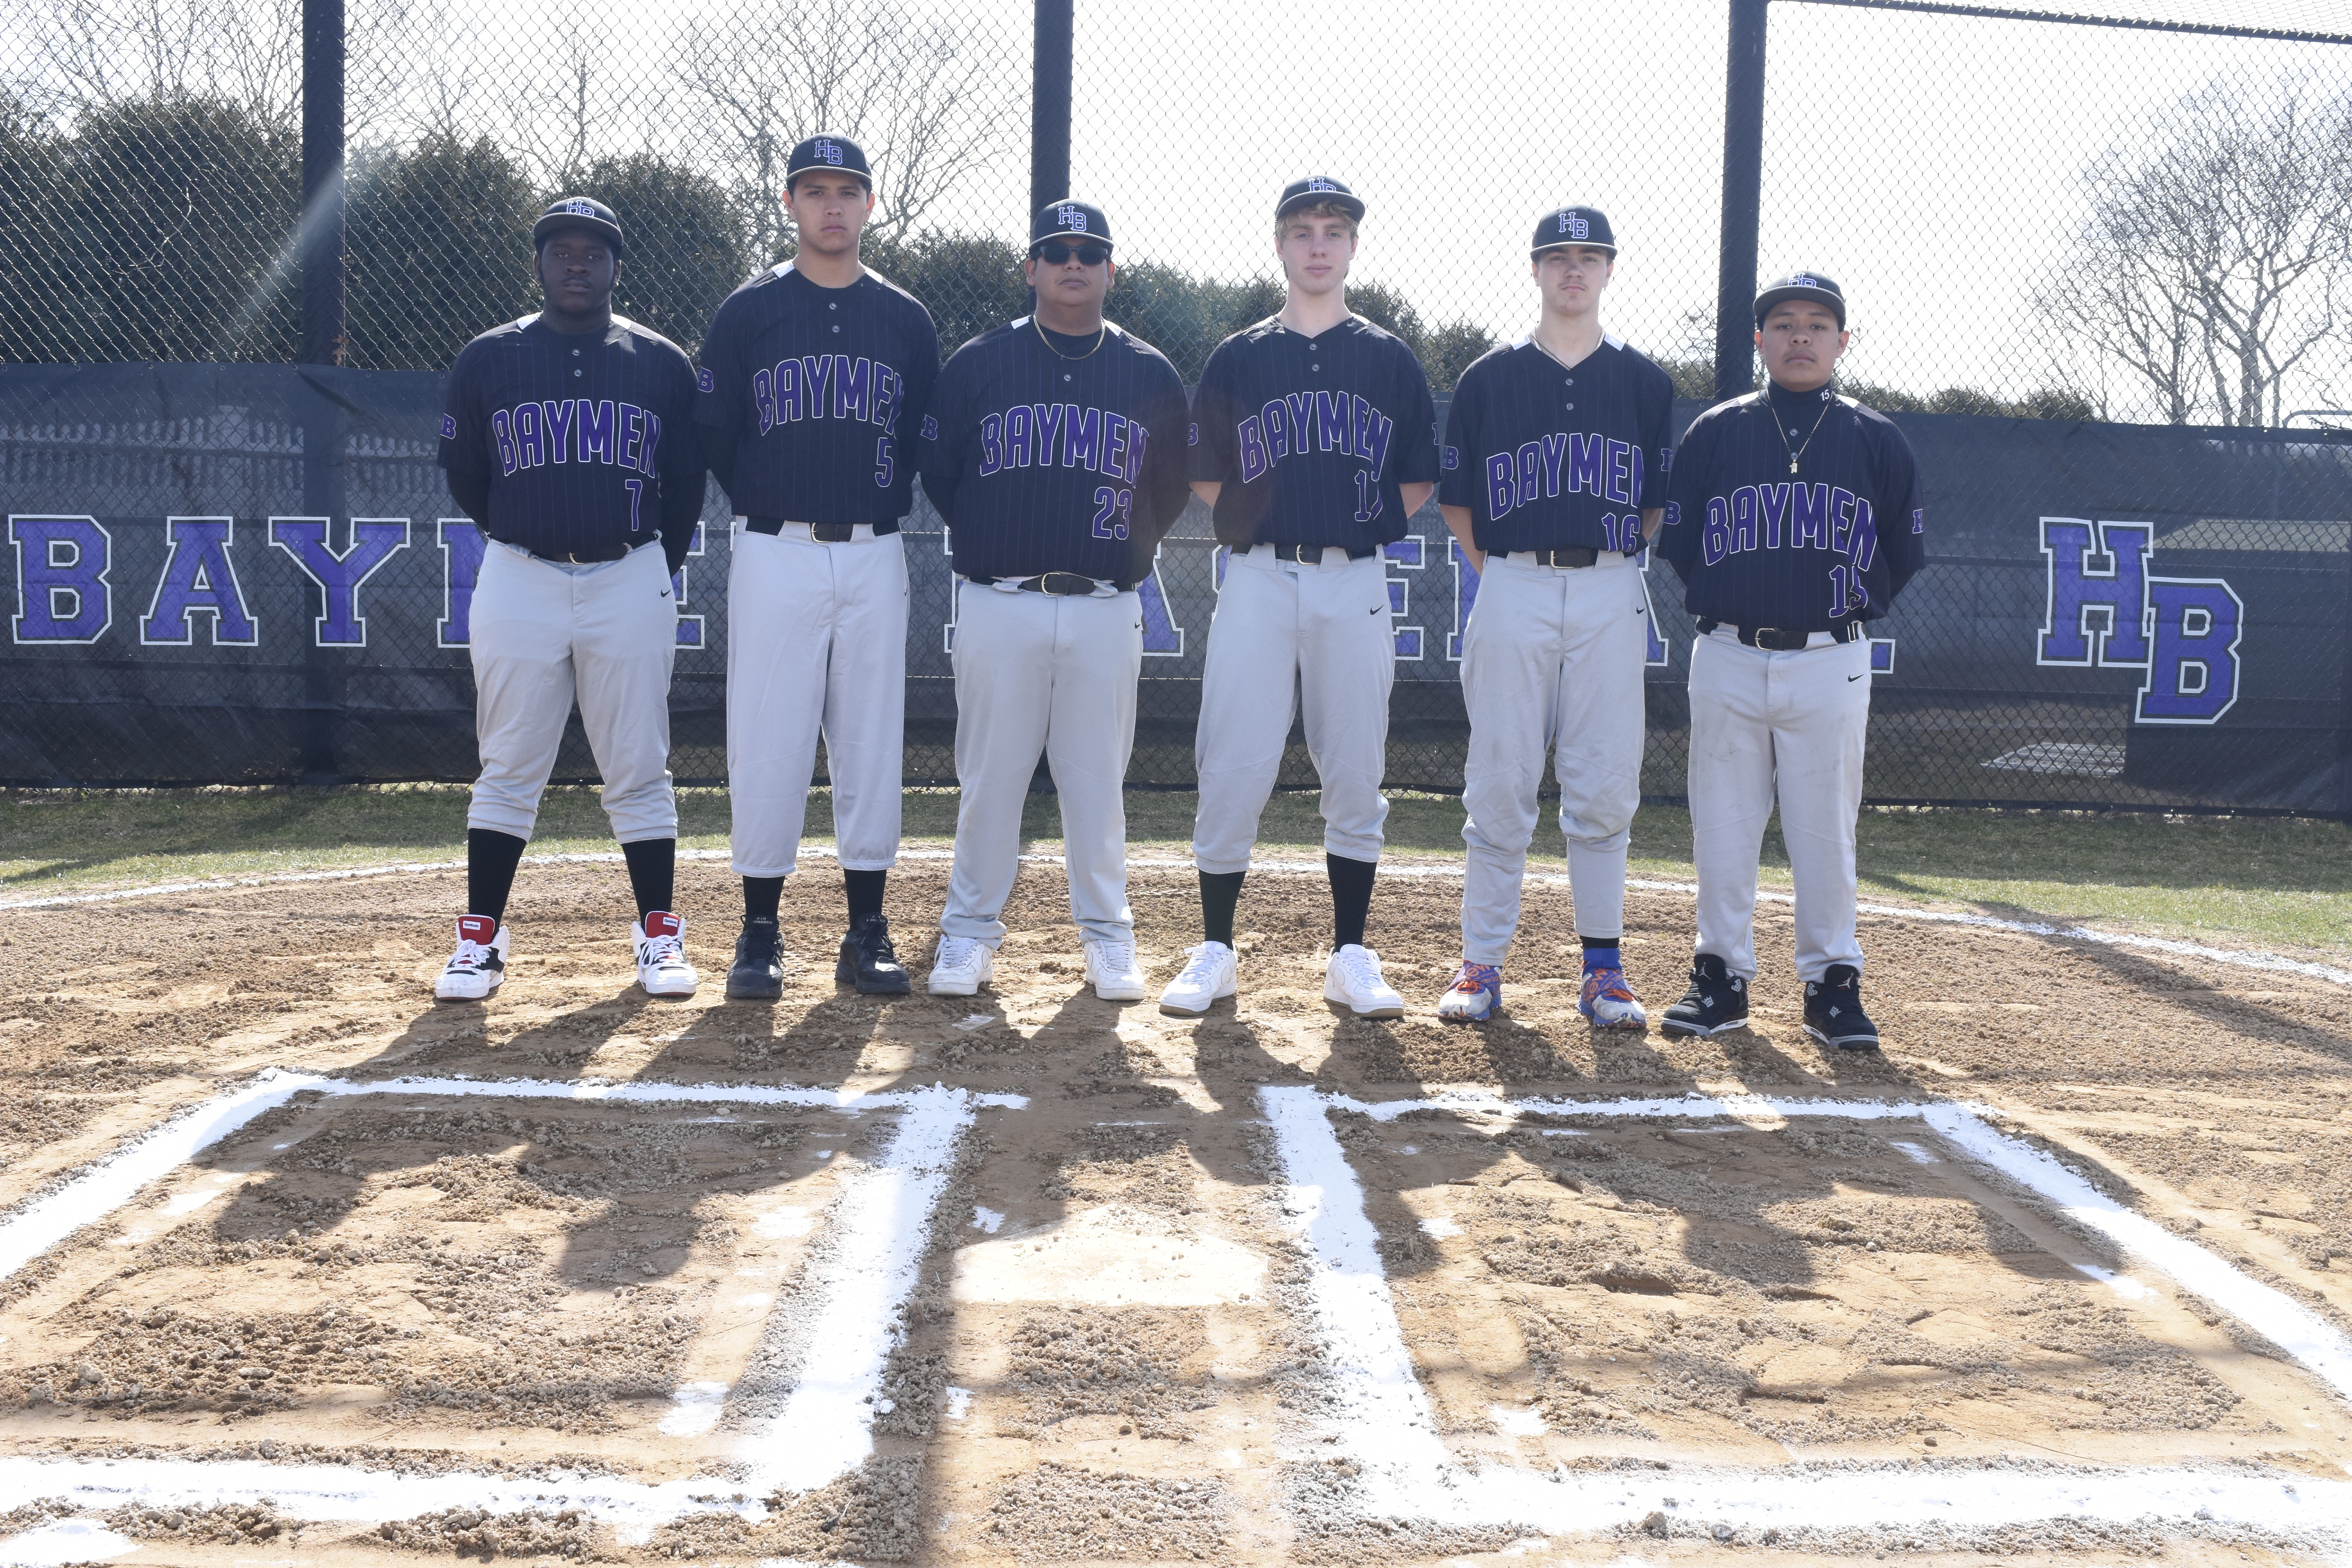 Returning seniors for the Baymen this season include, from left, Jahzani Edwards, Allan Canales, Jorge Hernandez, William Mendel, C.J. Peterson and John Reyes.  Kazmin Pensa-Johnson was missing for the photo.   DREW BUDD